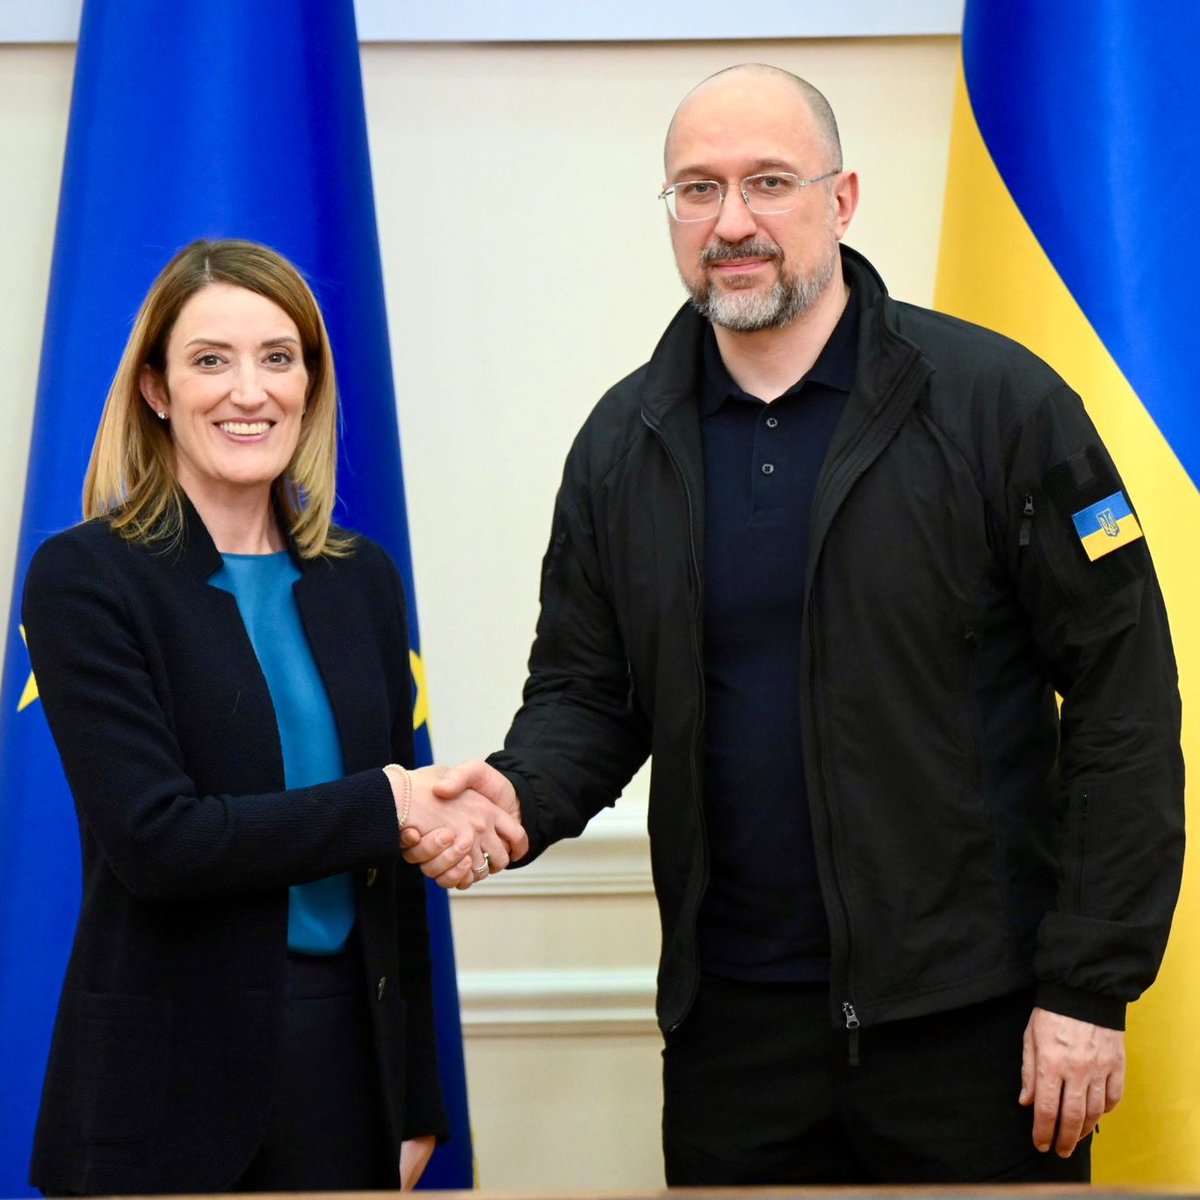 Good to be with Prime Minister @Denys_Shmyhal once again in Kyiv. Just as we were with Ukraine since day one of Russia's aggression, we will continue to support your country's European path. Towards peace, stability and freedom. For a common future. Together 🇪🇺🇺🇦